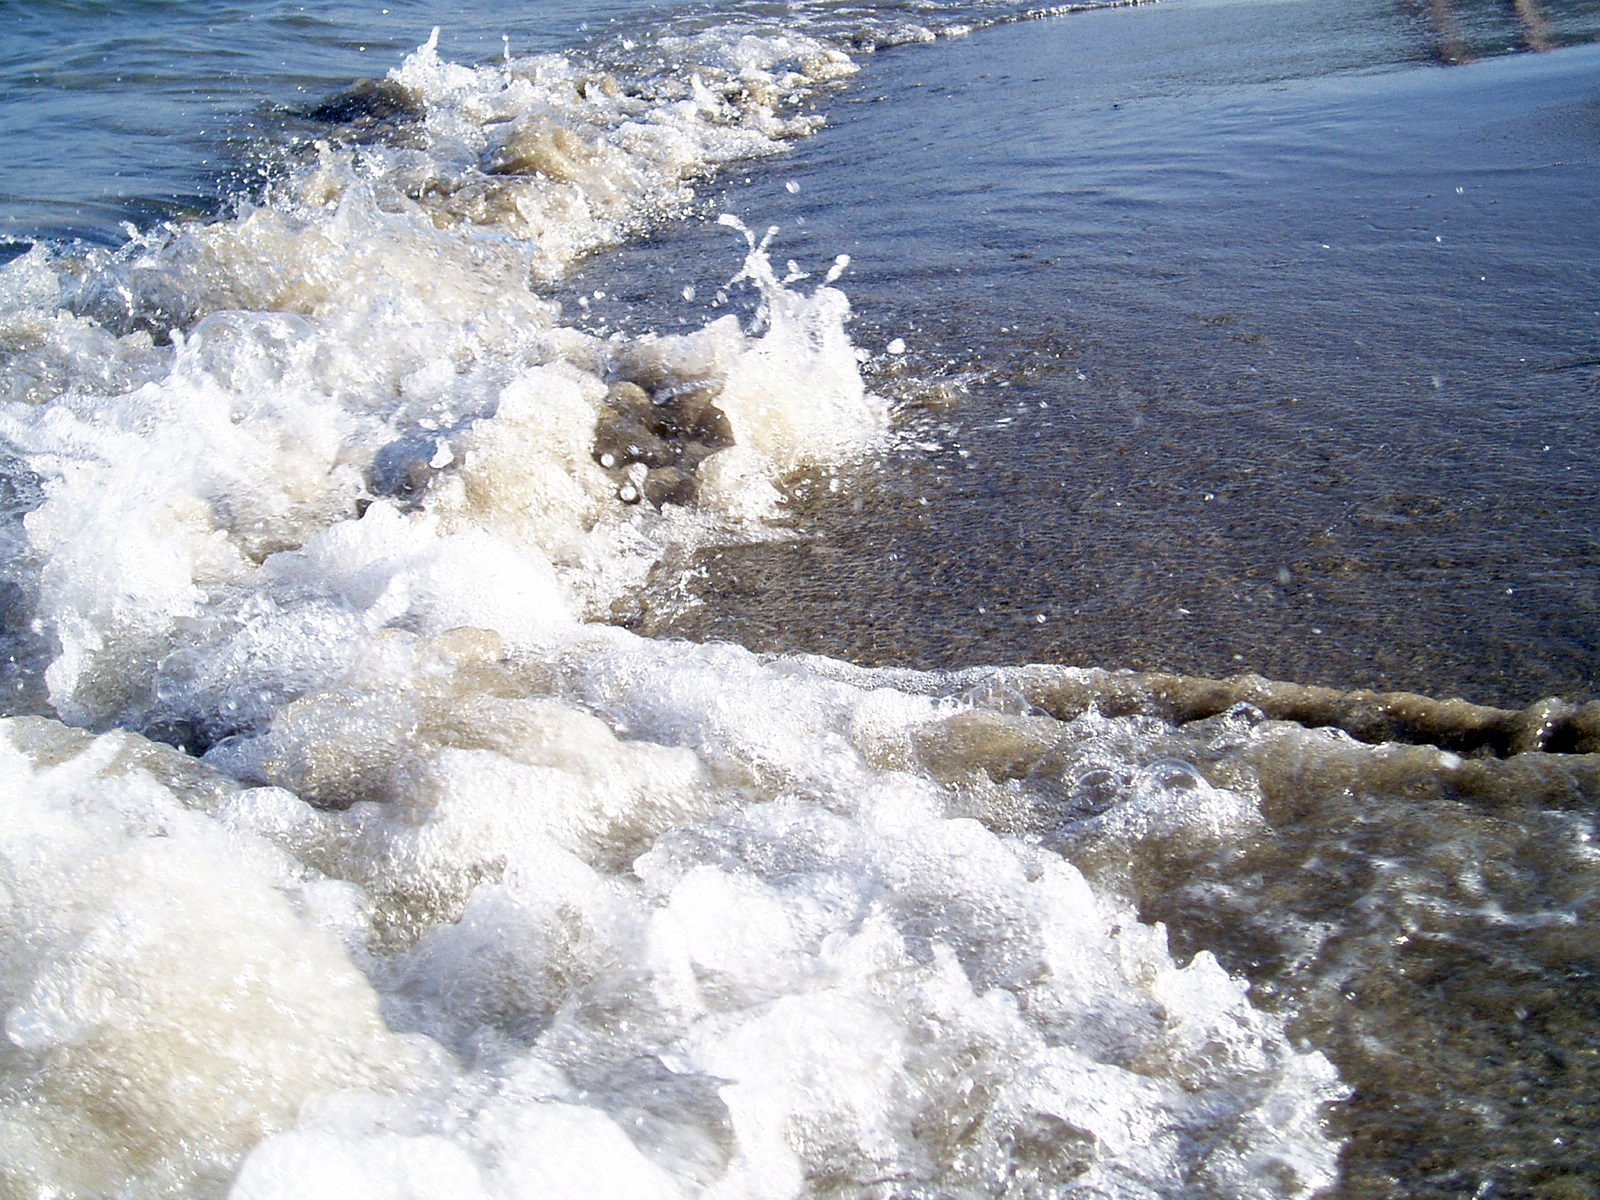 some small foamy waves near the water